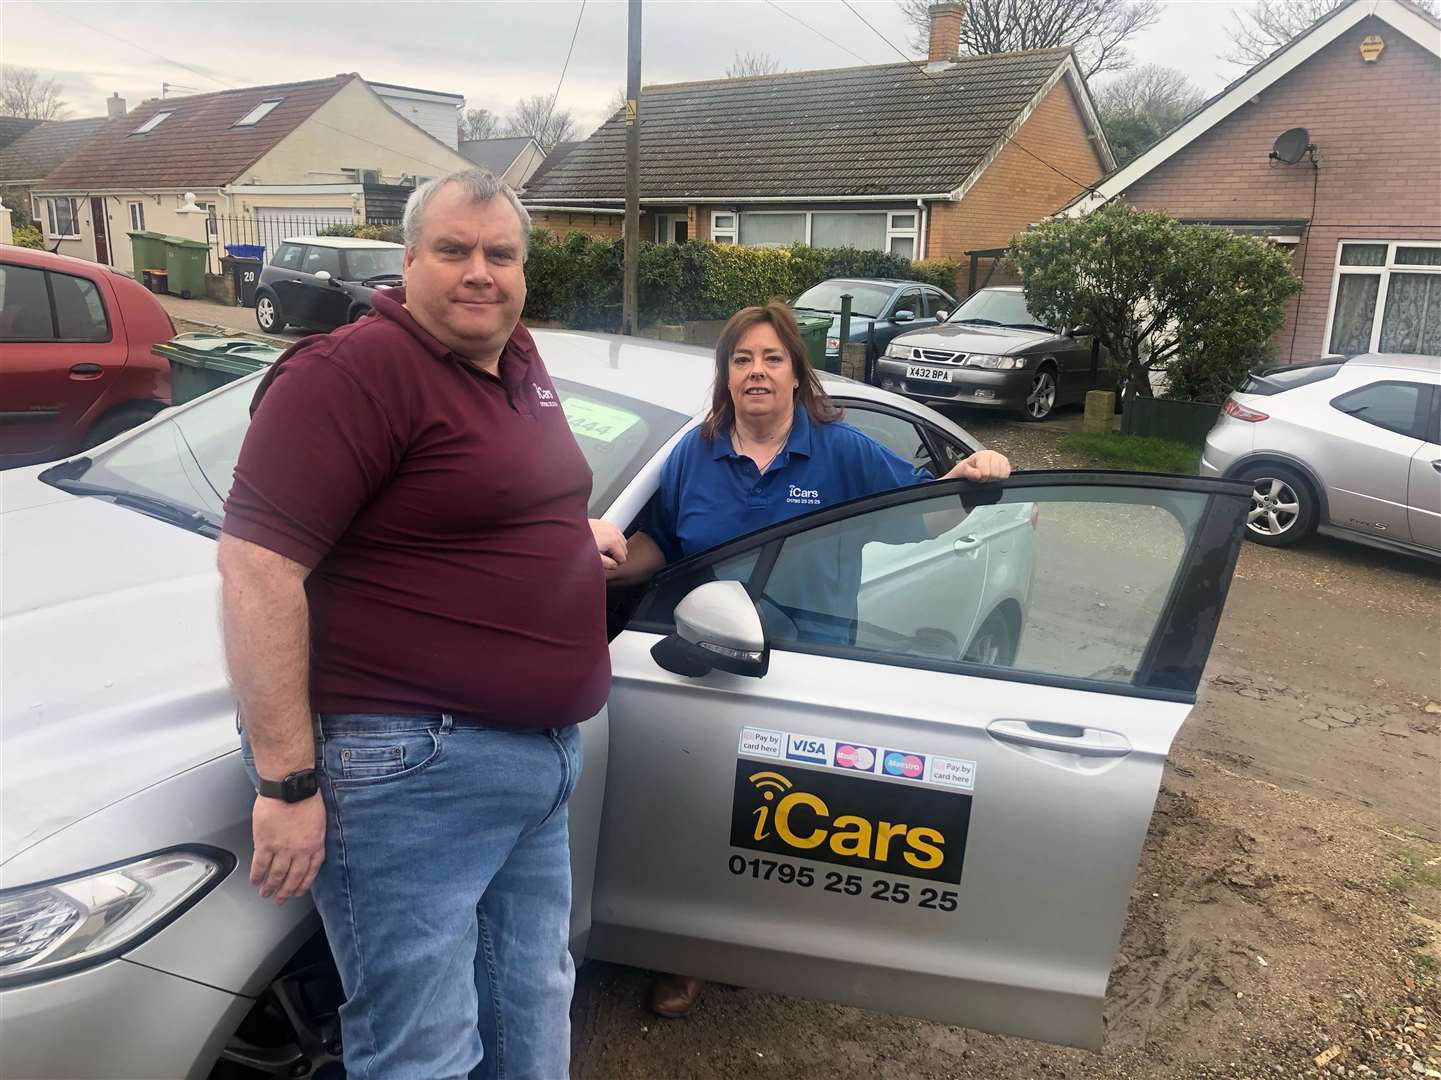 Taxi driver Janice Crawford and controller Neil McLennan from cab company iCars who say they gave a lift to missing pensioner Doug Kimber of Sheppey